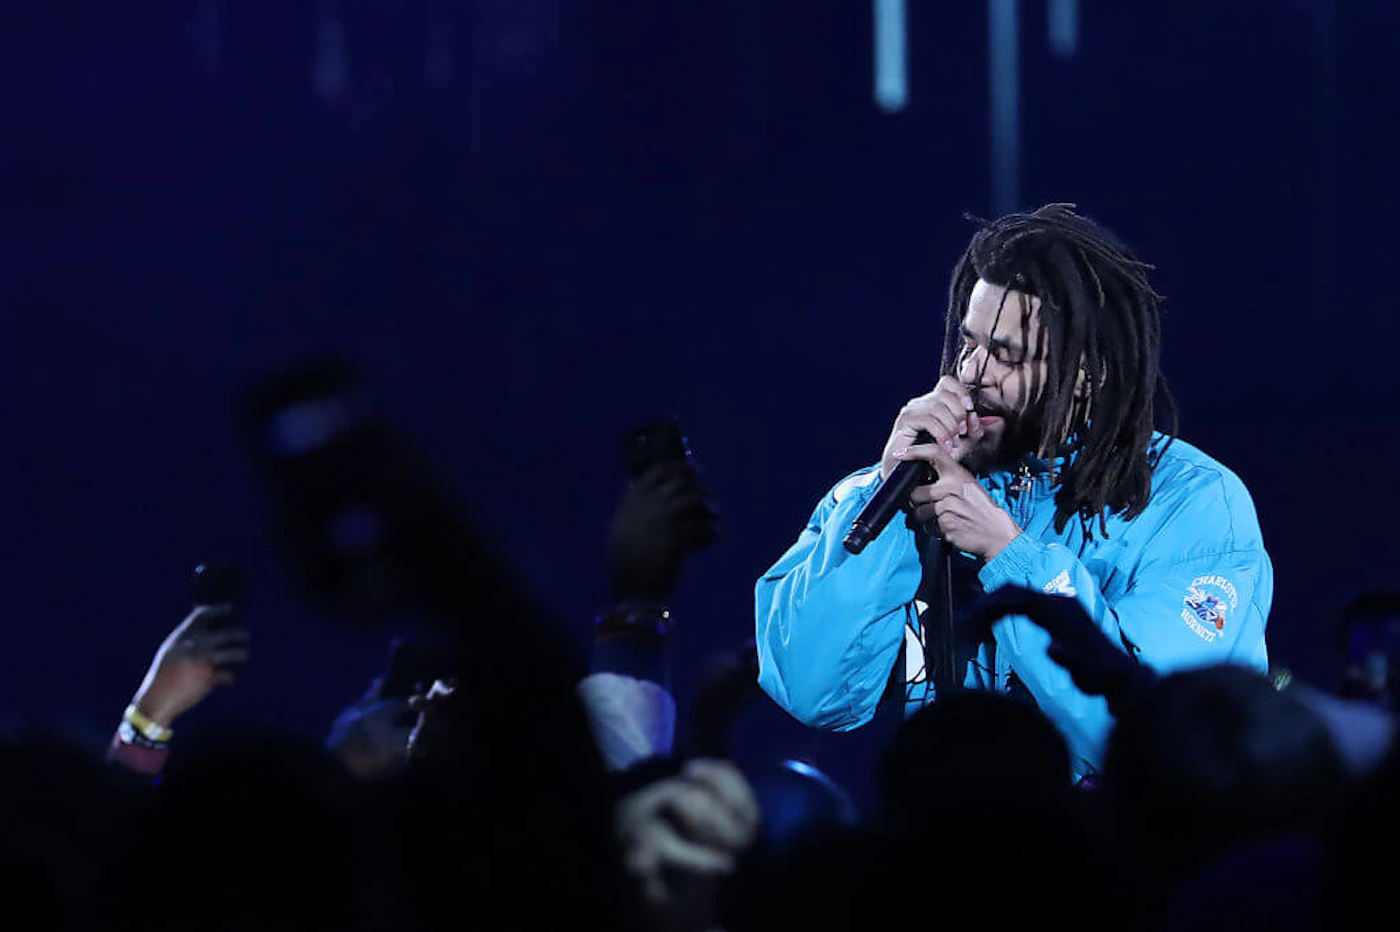 Rapper J. Cole performs during halftime during the NBA All-Star game in 2019 in Charlotte. Coronavirus forced the Fayetteville native to cancel his North Carolina music festival Dreamville in 2020. (Photo by Streeter Lecka/Getty Images)